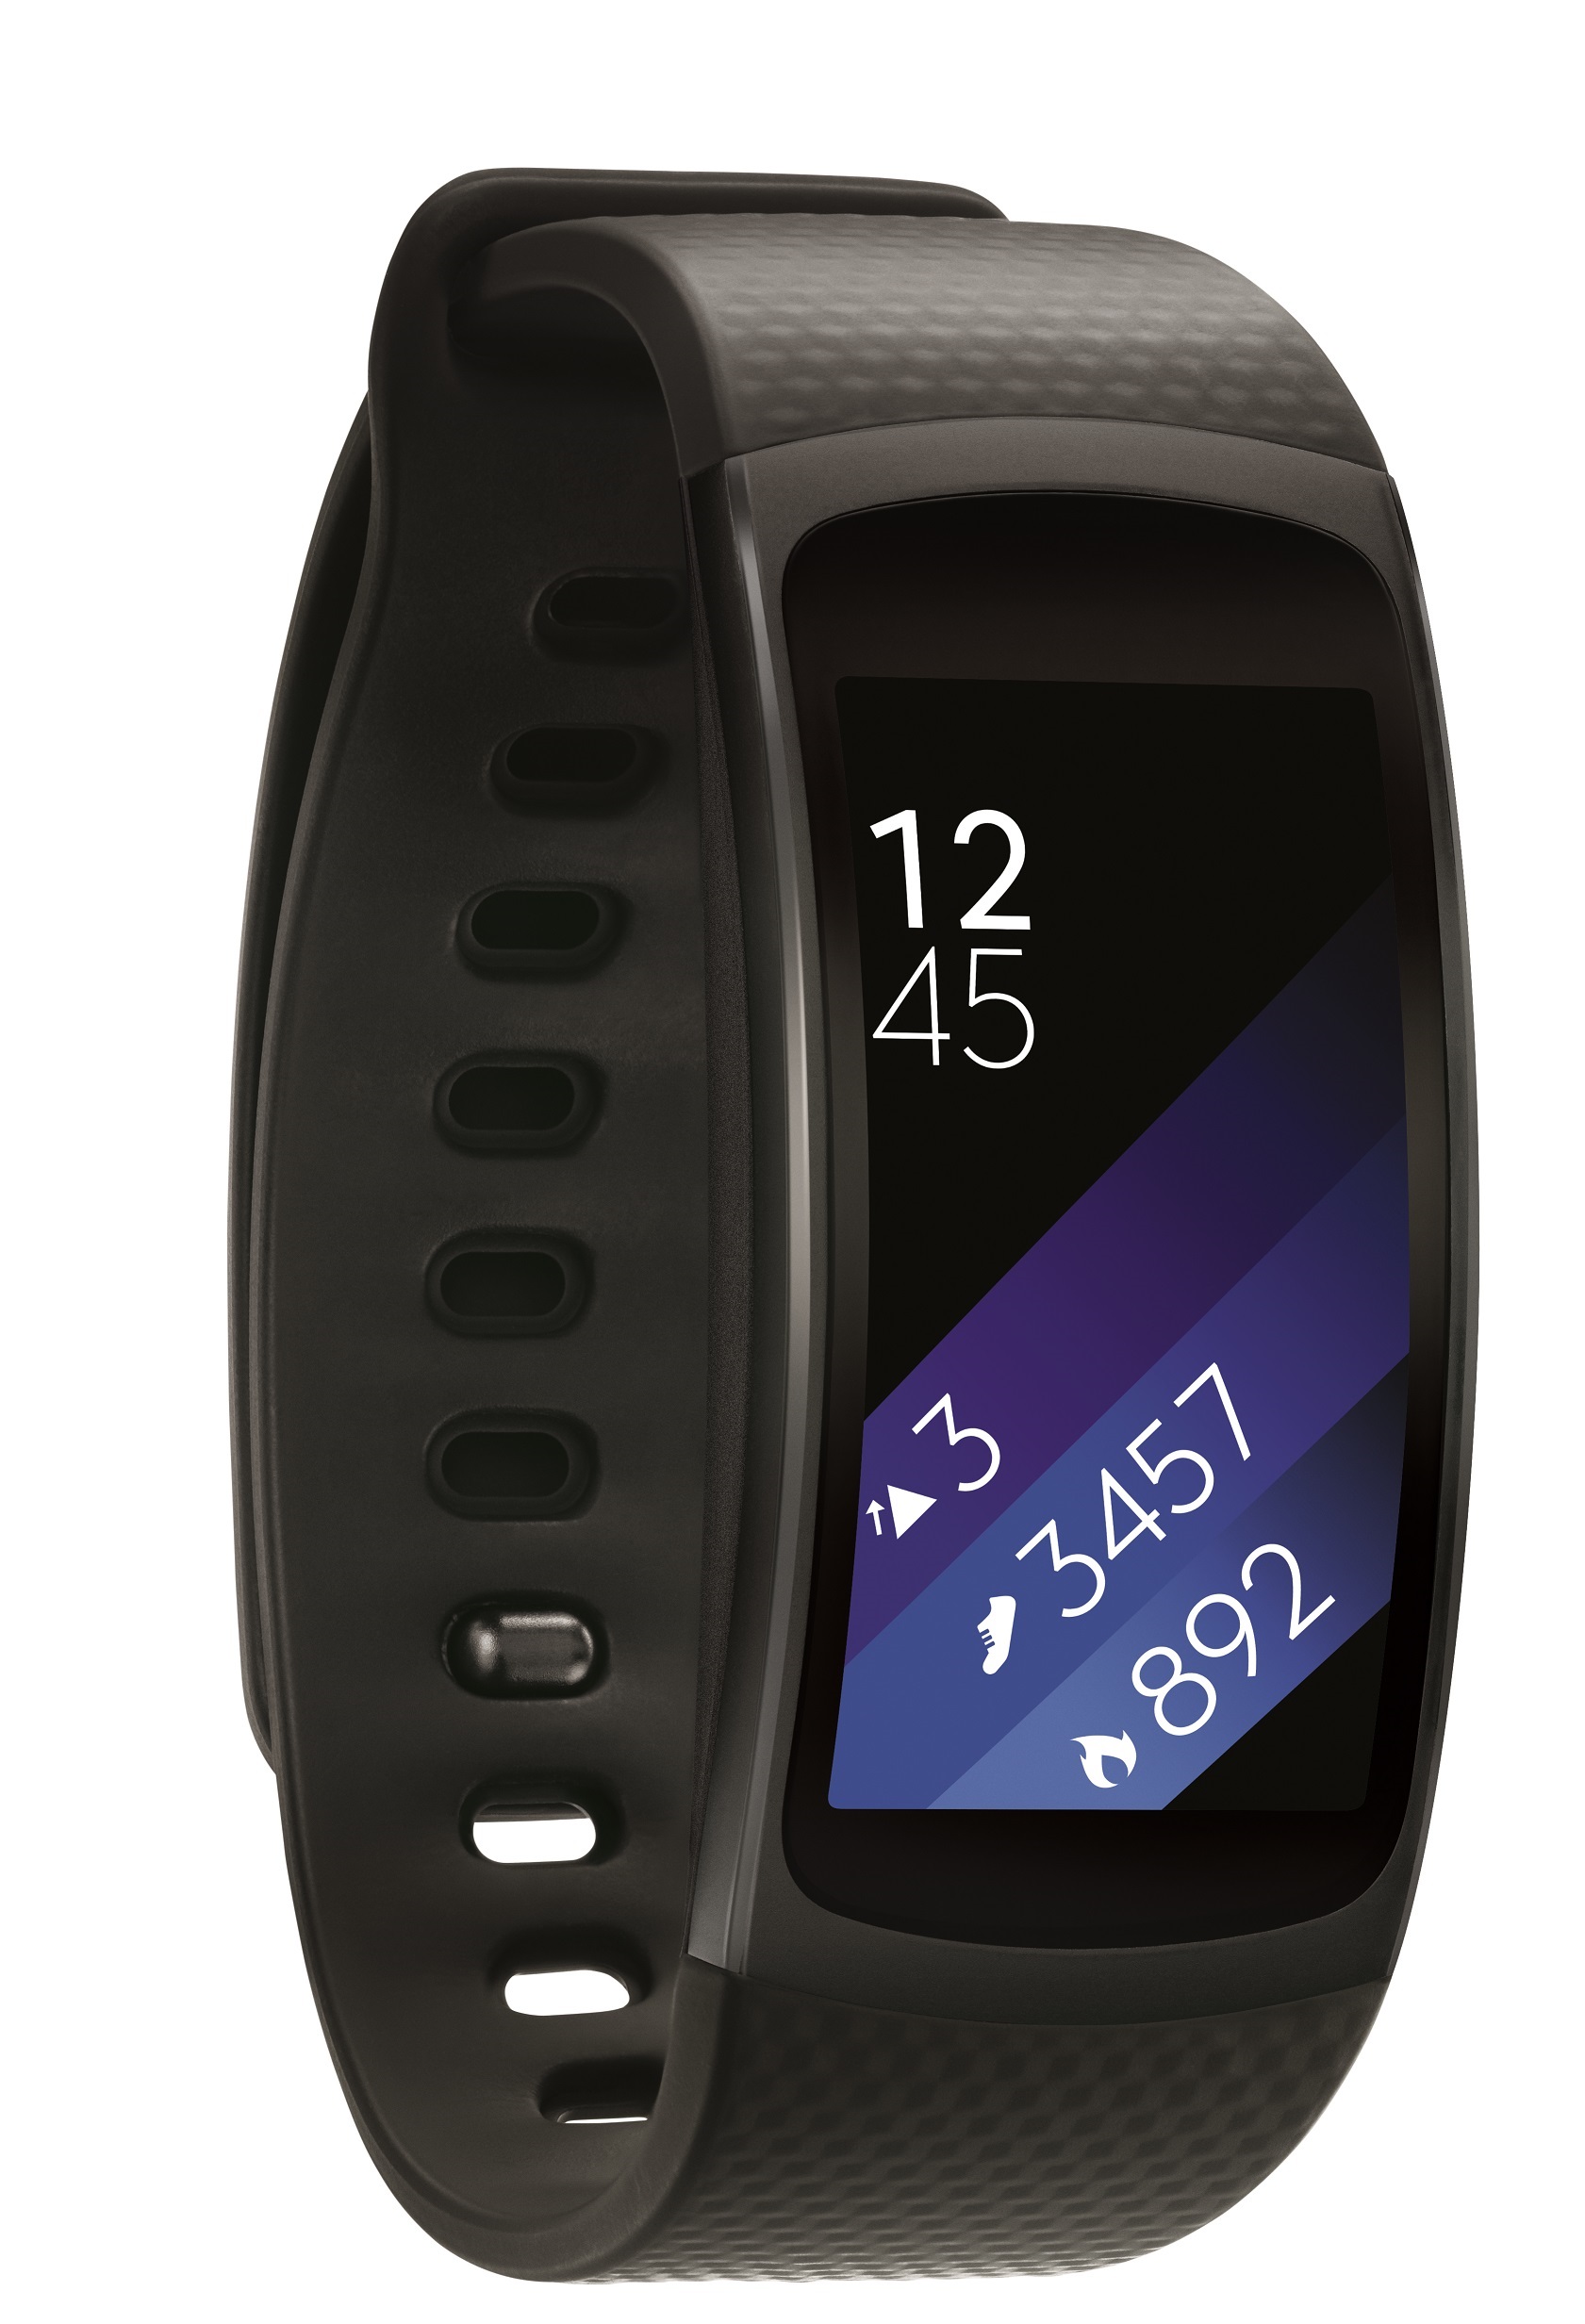 Samsung Gear Fit2 now available at Verizon stores